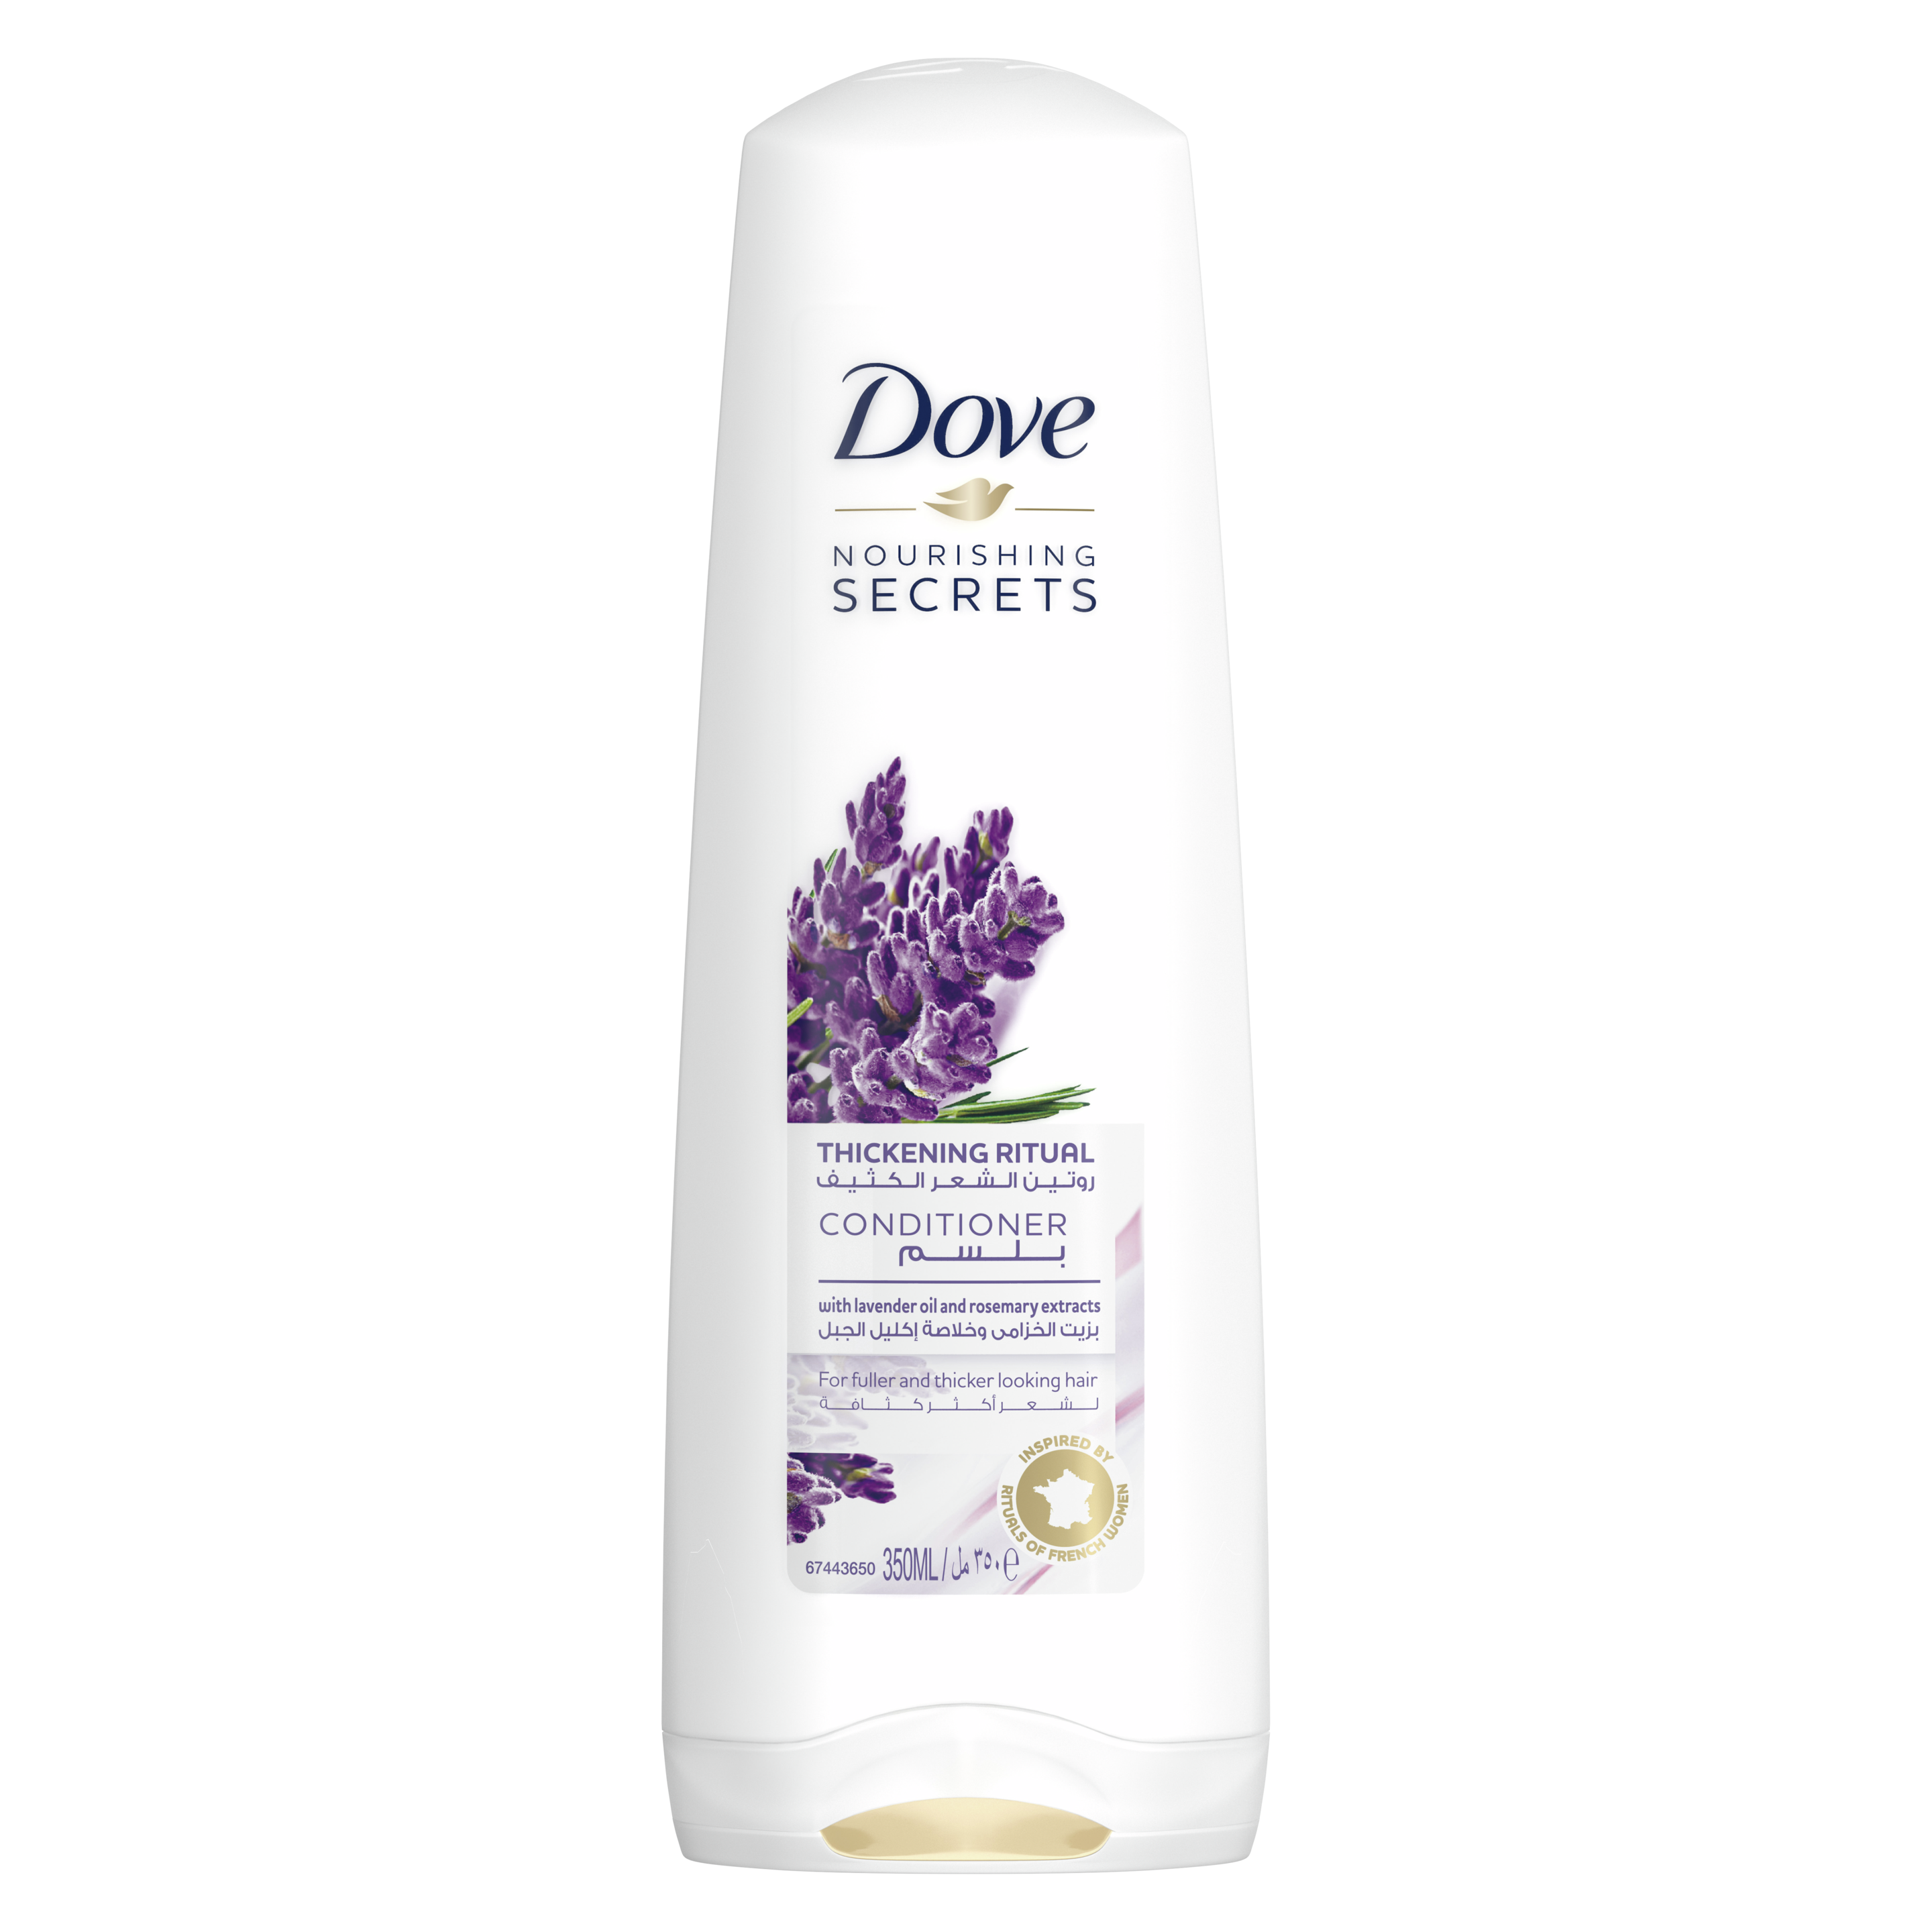 Dove Nourishing Secrets Conditioner Relaxing Ritual - Lavender Oil and Rosemary Extract 350ml